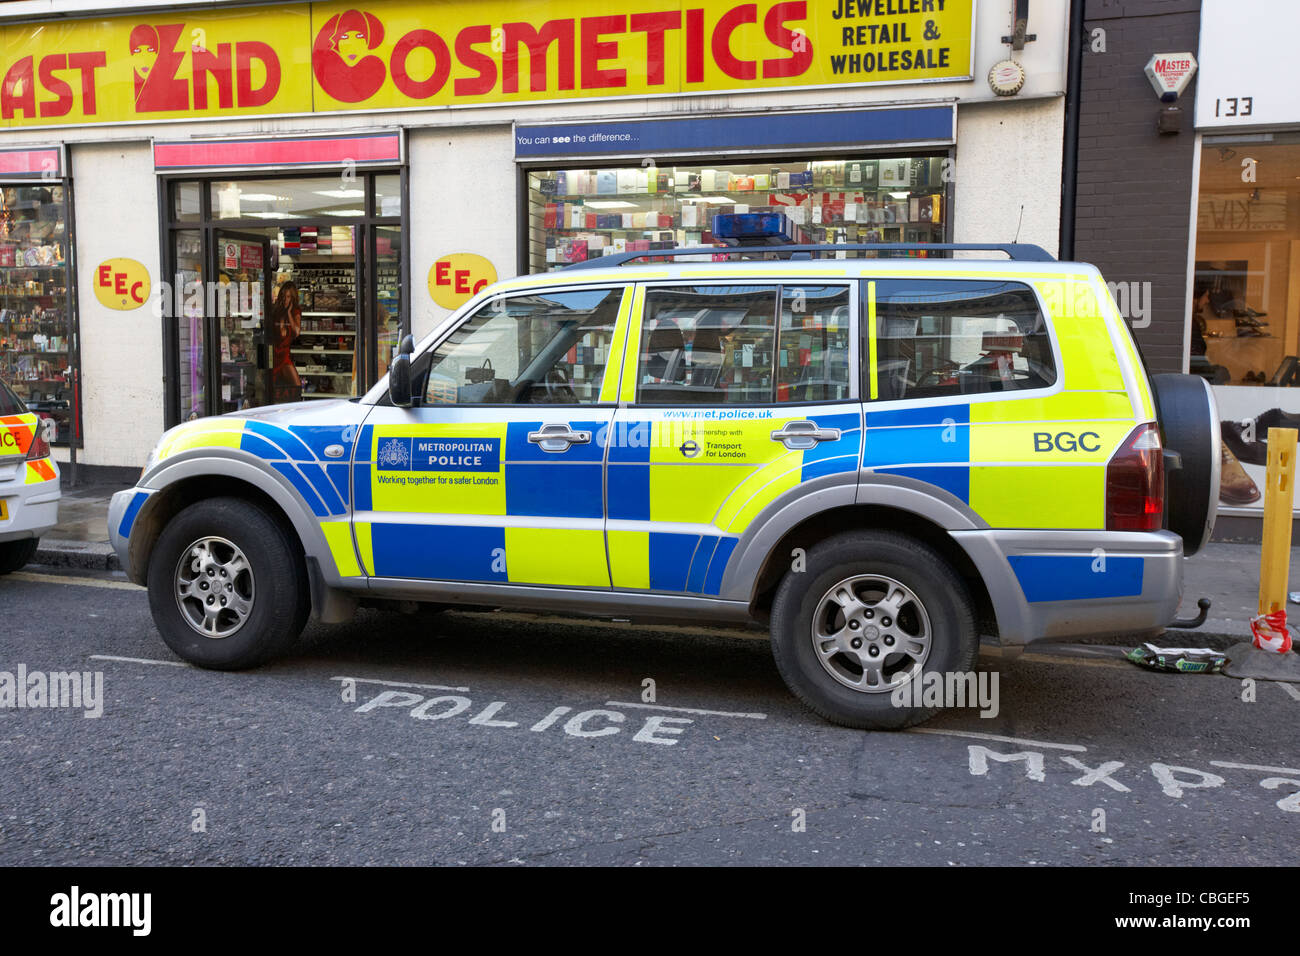 metropolitan police 4x4 vehicle in battenburg chequered livery parked in reserved onstreet bay london england uk united kingdom Stock Photo